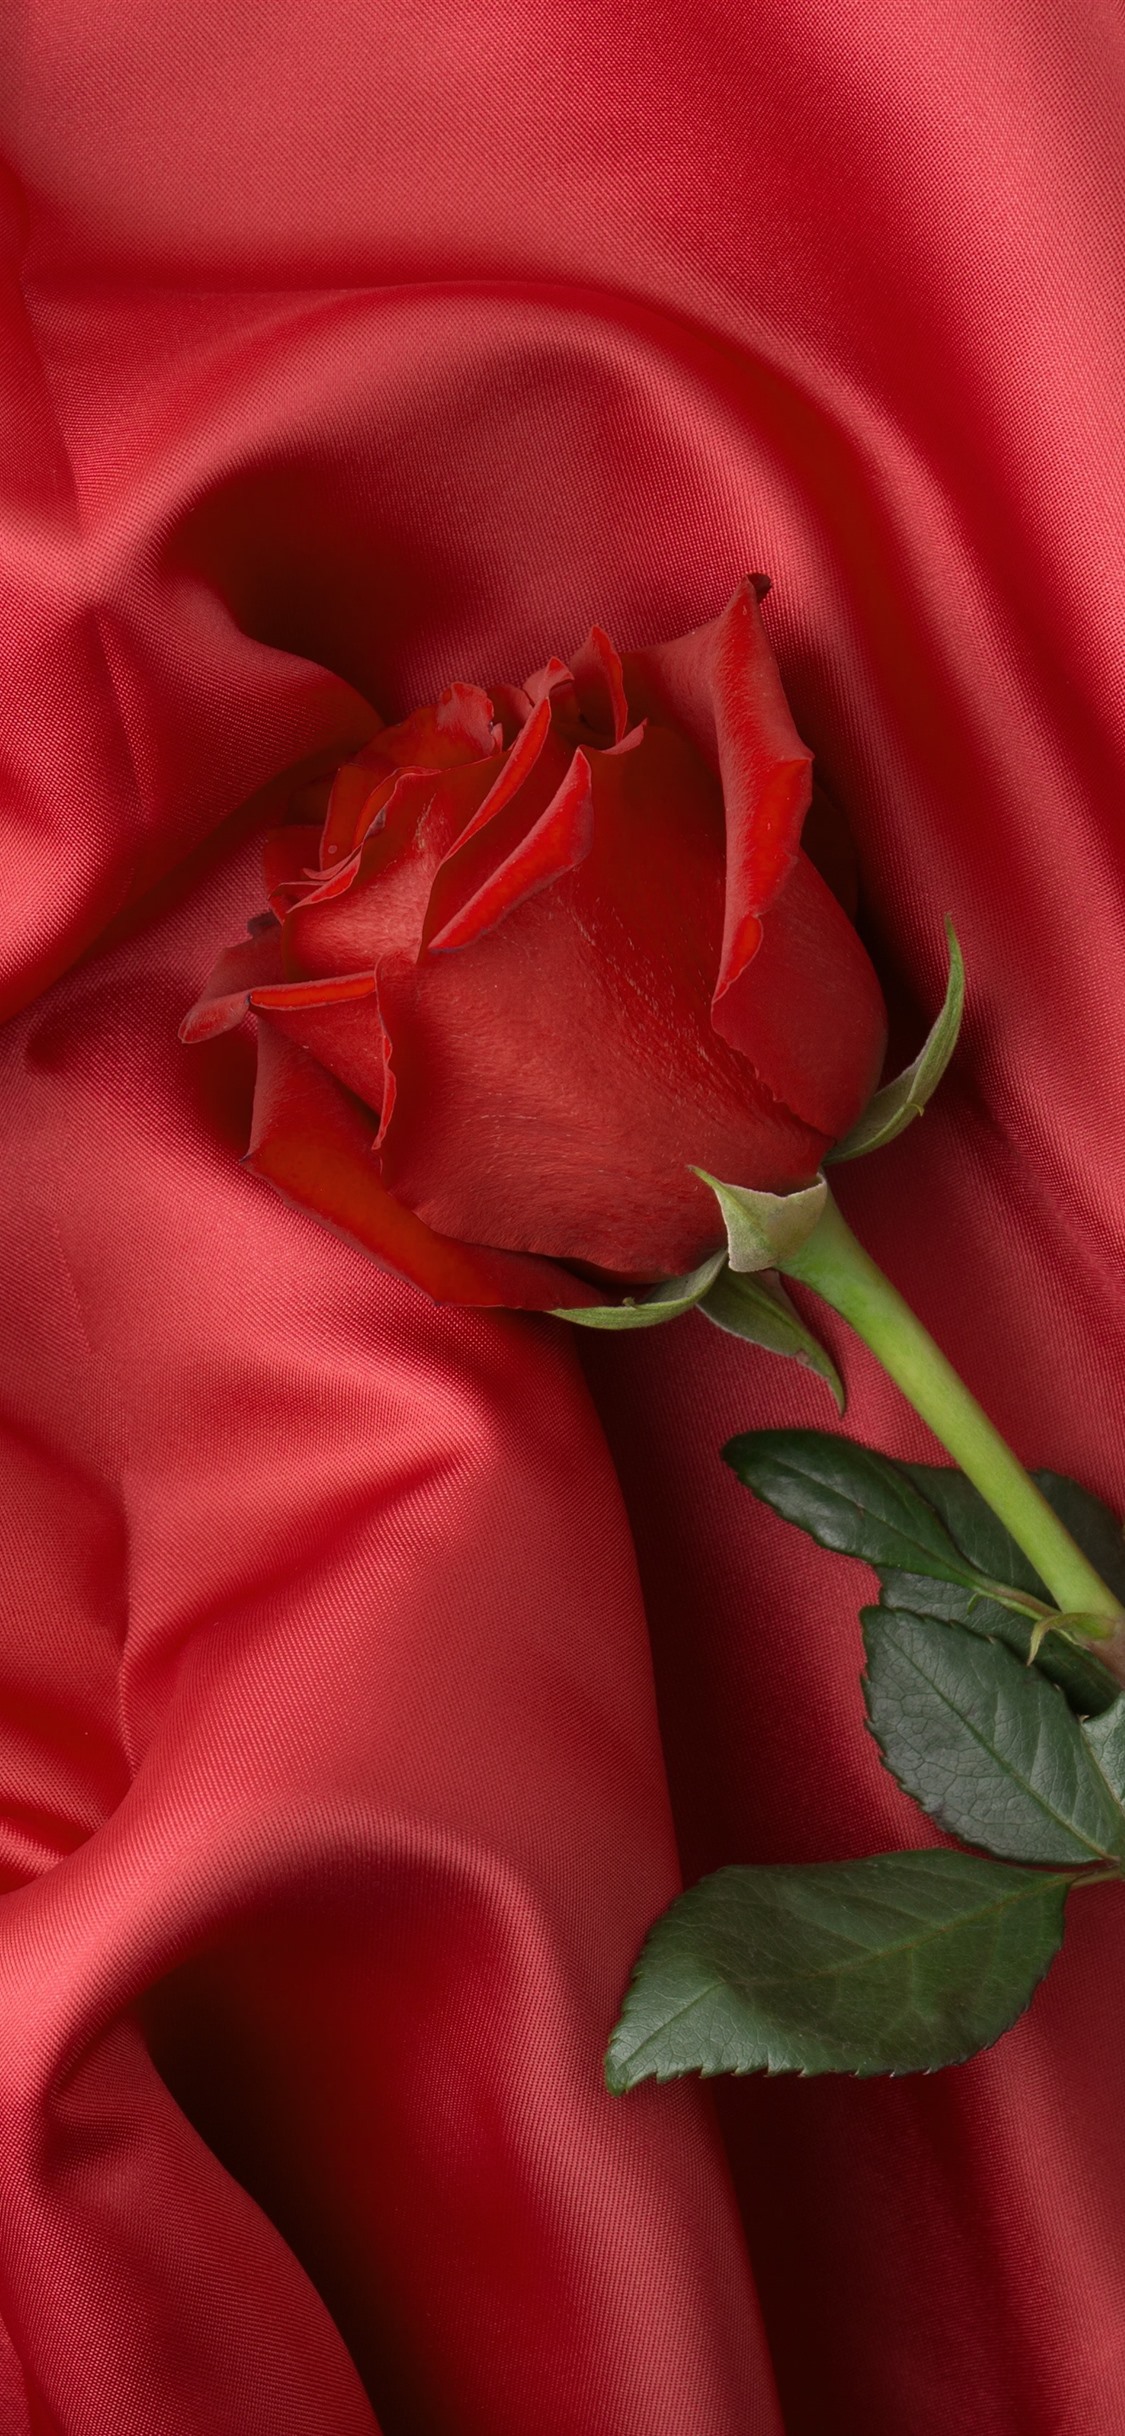 Iphone Wallpaper Fabric, Red Rose - Flowers For My King - HD Wallpaper 